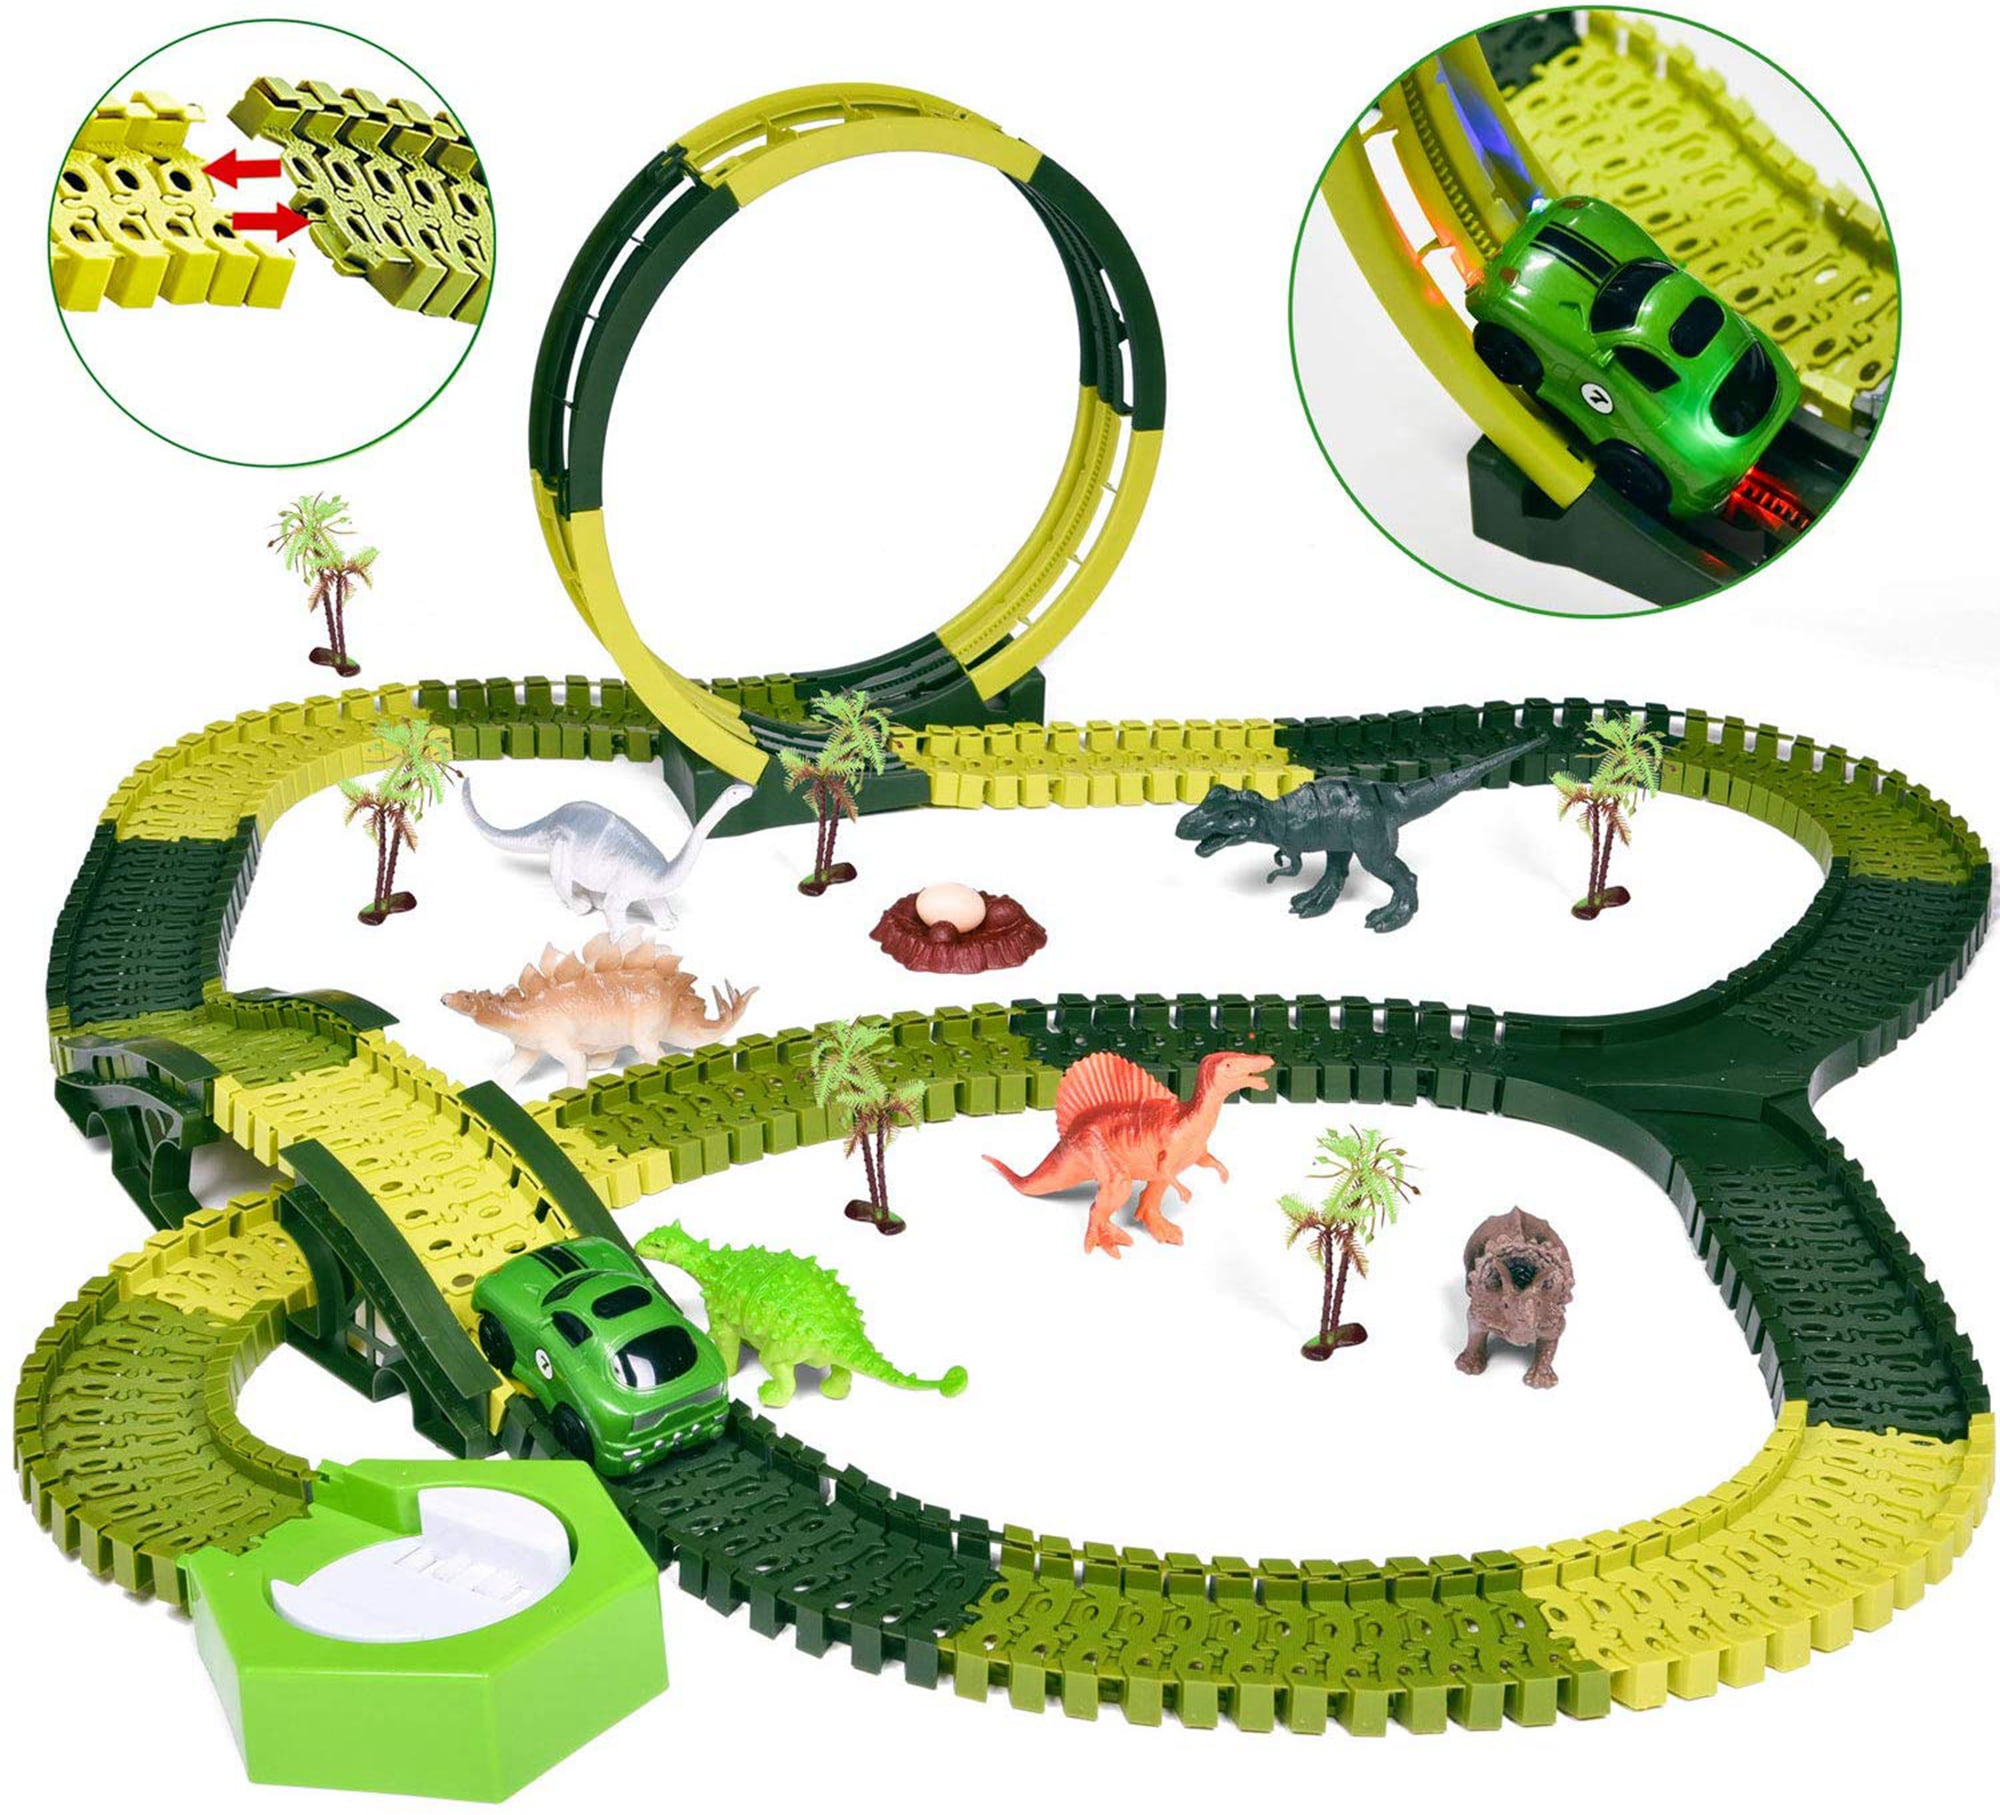 Dinosaur Toys Race Car Flexible Track Playset Toys for 3 4 5 6 Year /& Up Old Kids Boys Girls,120pcs Create A Dinosaur World Road Race,Flexible Track Playset with 2 Dinosaurs /& Car Toy